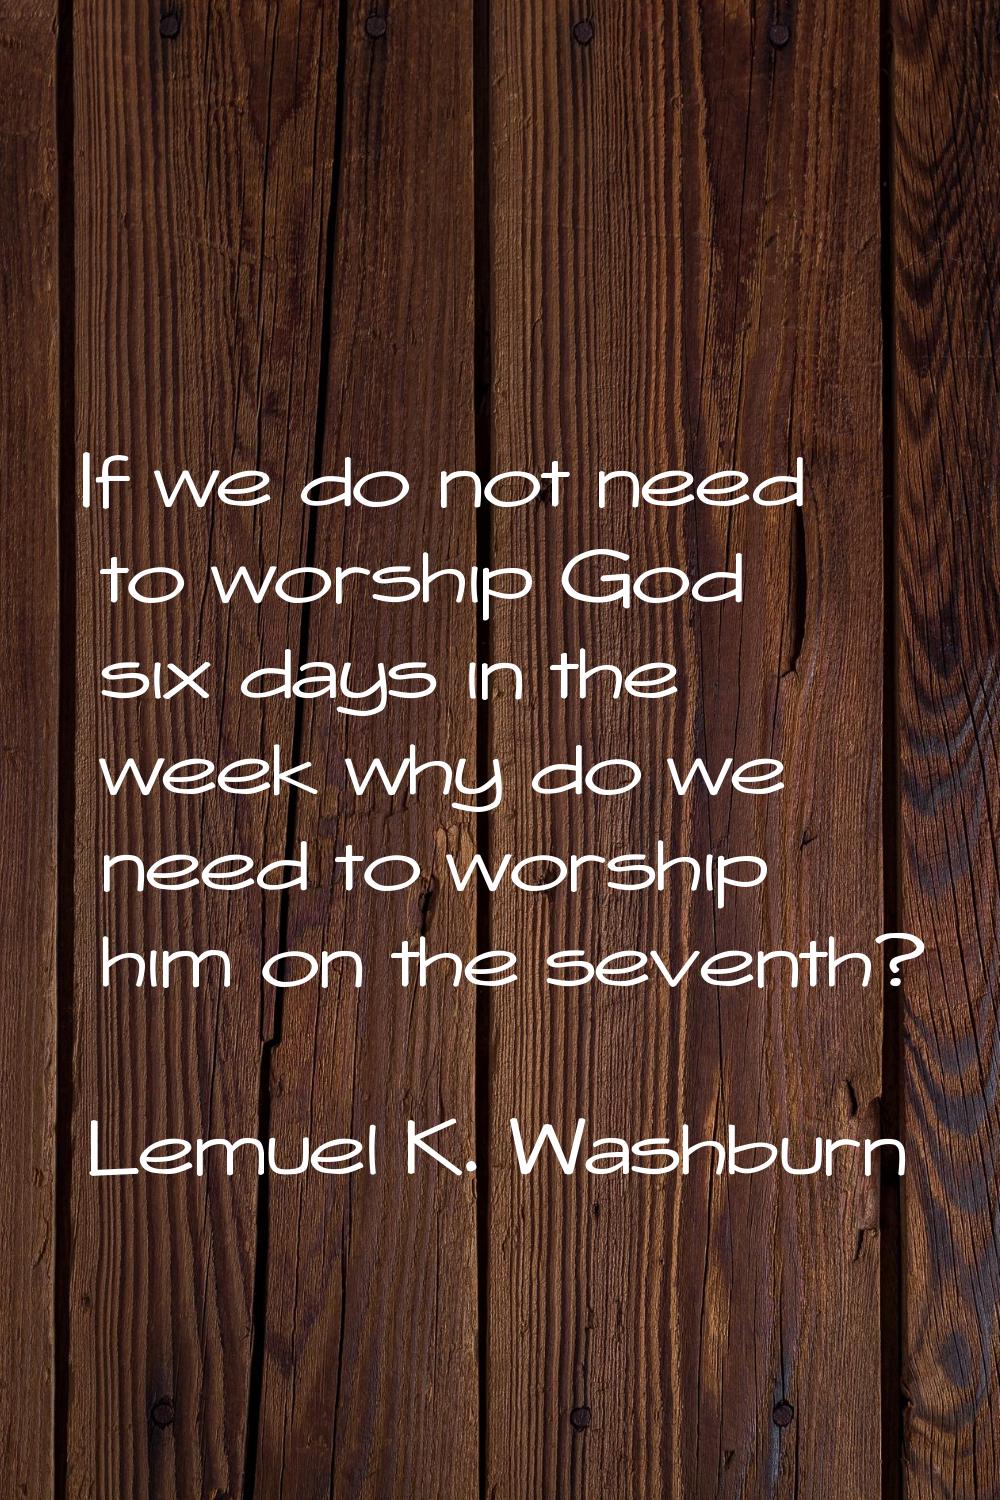 If we do not need to worship God six days in the week why do we need to worship him on the seventh?